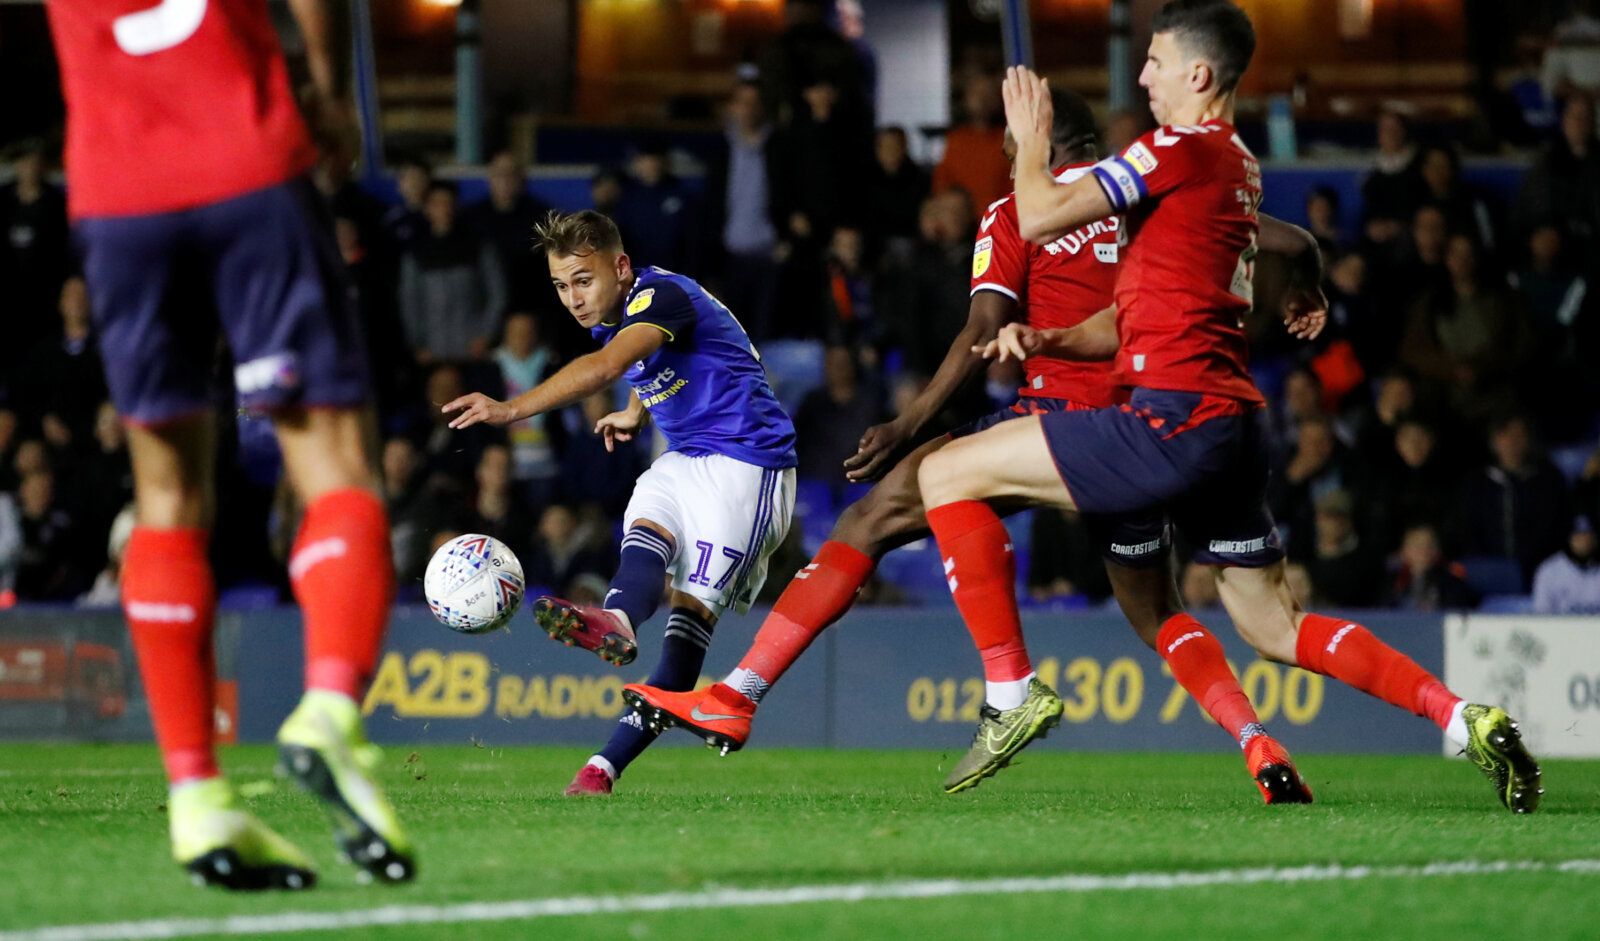 Soccer Football - Championship - Birmingham City v Middlesbrough - St Andrew's, Birmingham, Britain -October 4, 2019   Birmingham's Fran Villalba shoots at goal   Action Images/Andrew Boyers    EDITORIAL USE ONLY. No use with unauthorized audio, video, data, fixture lists, club/league logos or 